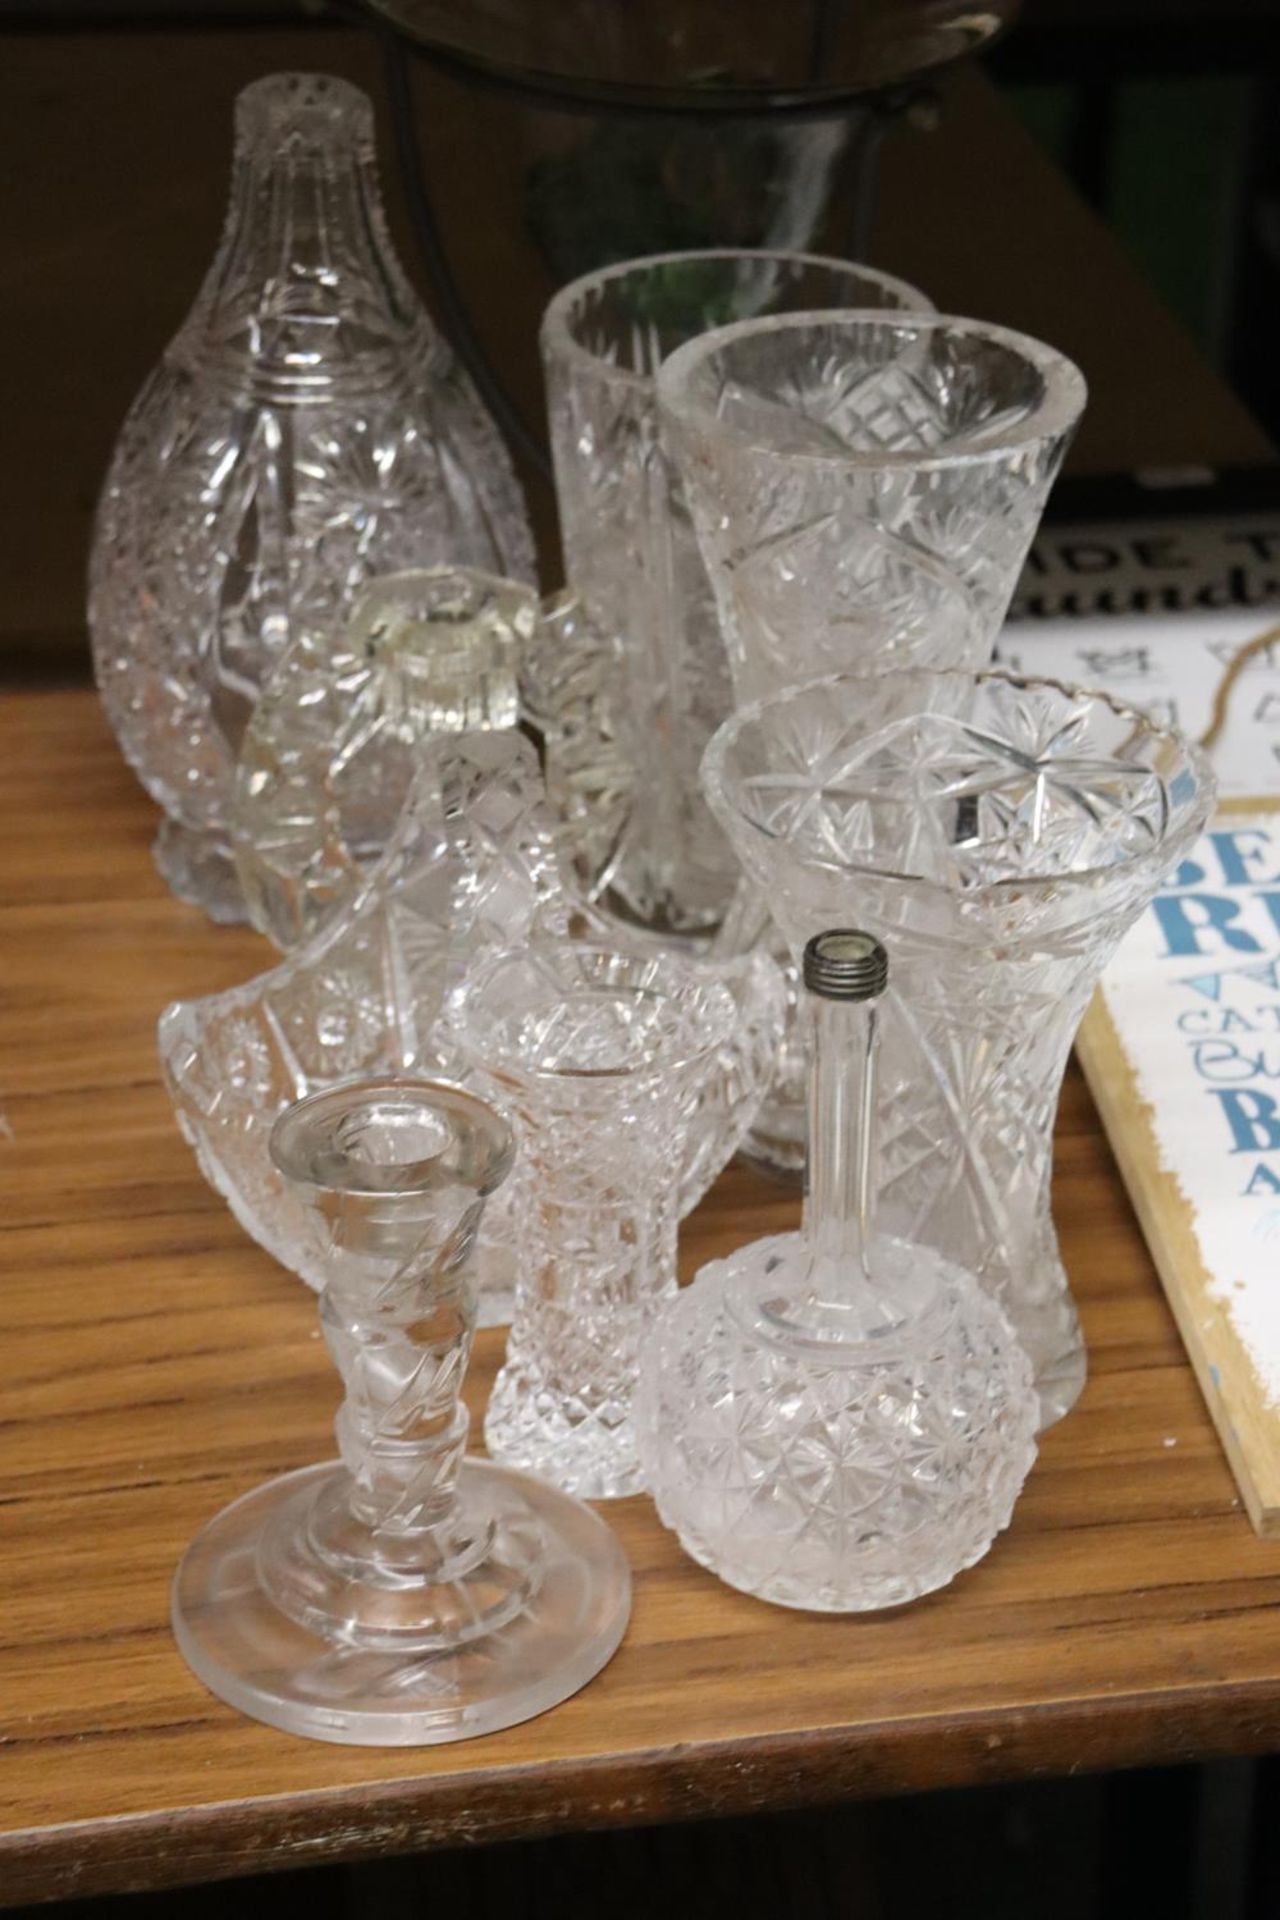 A QUANTITY OF GLASSWARE TO INCLUDE VASES, CANDLESTICKS, ETC, PLUS TWO SIGNS, 'BEACH RULES' AND ' - Image 2 of 3